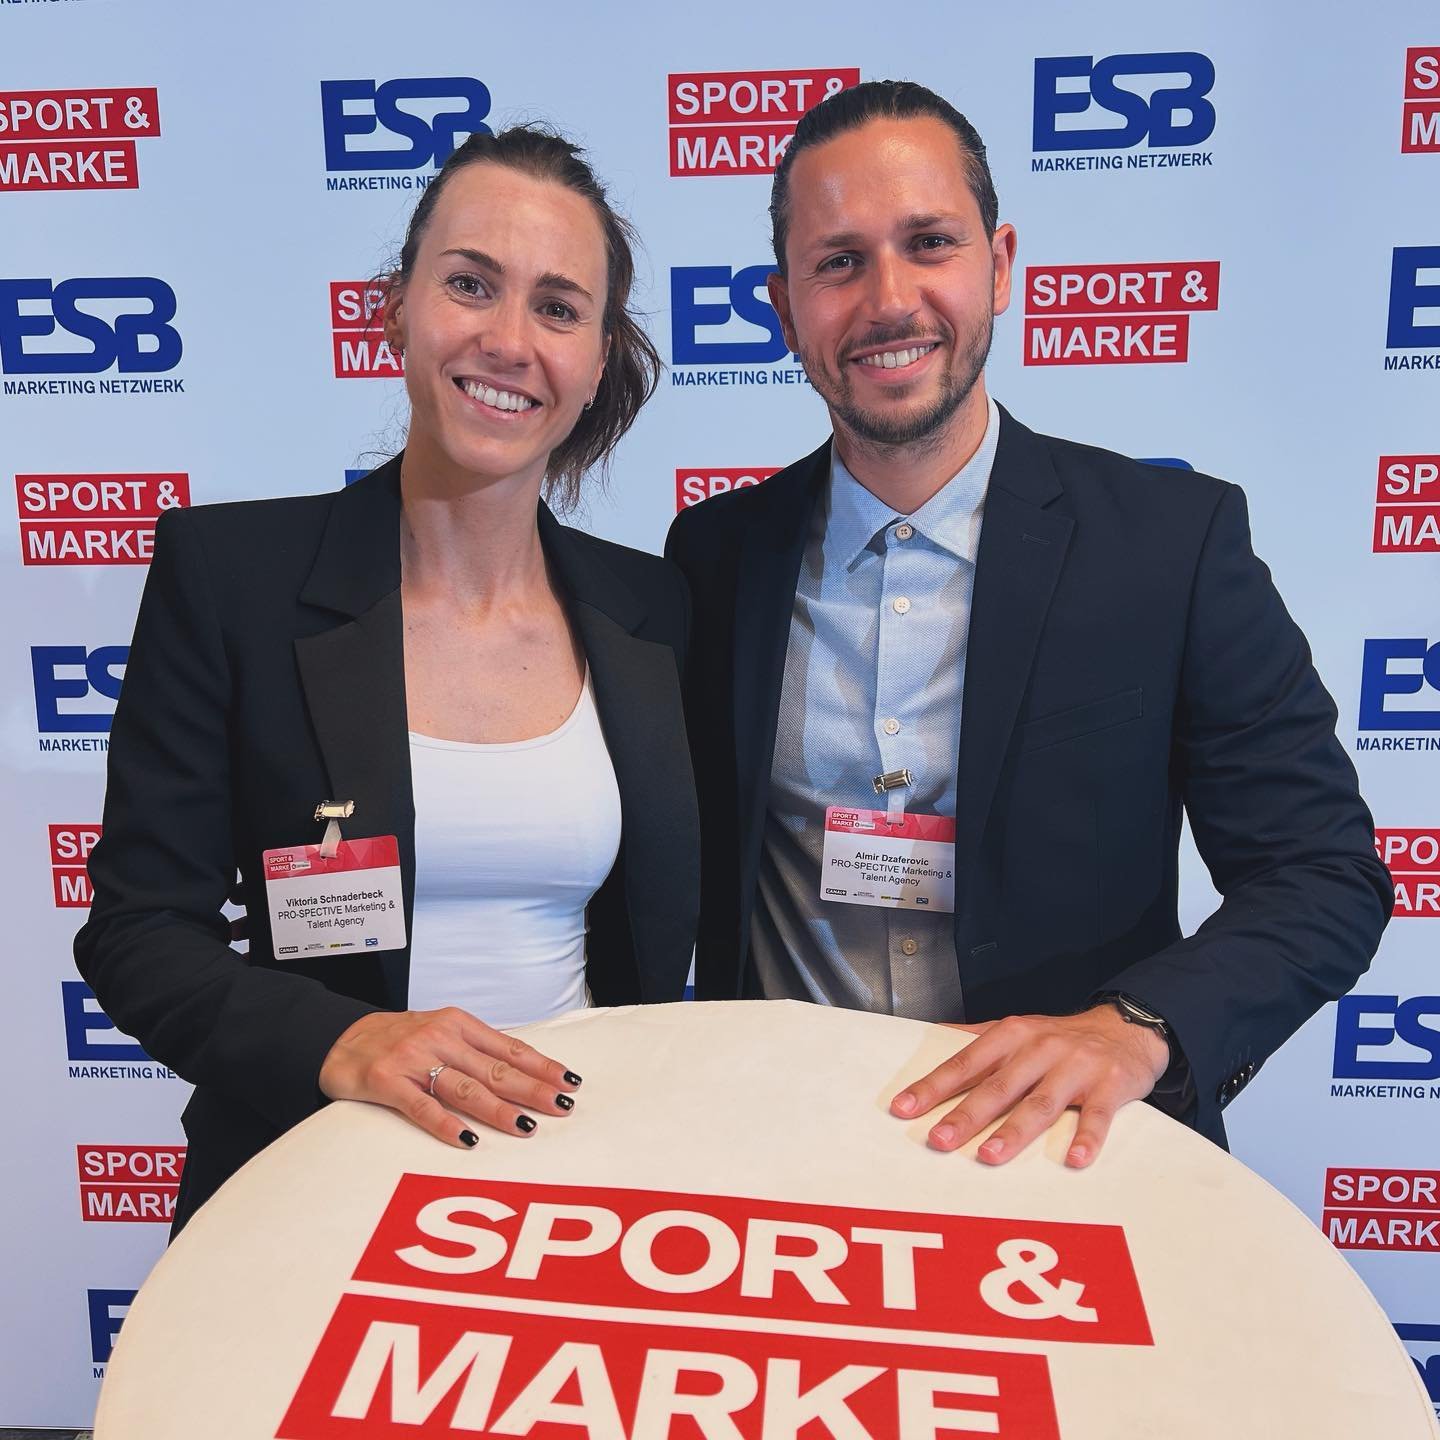 Yesterday, we had the pleasure of attending Austria&rsquo;s largest sports sponsorship event, Sport&amp;Marke.

Our CEO, @viki_schnaderbeck , was invited to join a panel discussion on the reach of so-called &bdquo;Sportfluencers.&ldquo; Along with @m